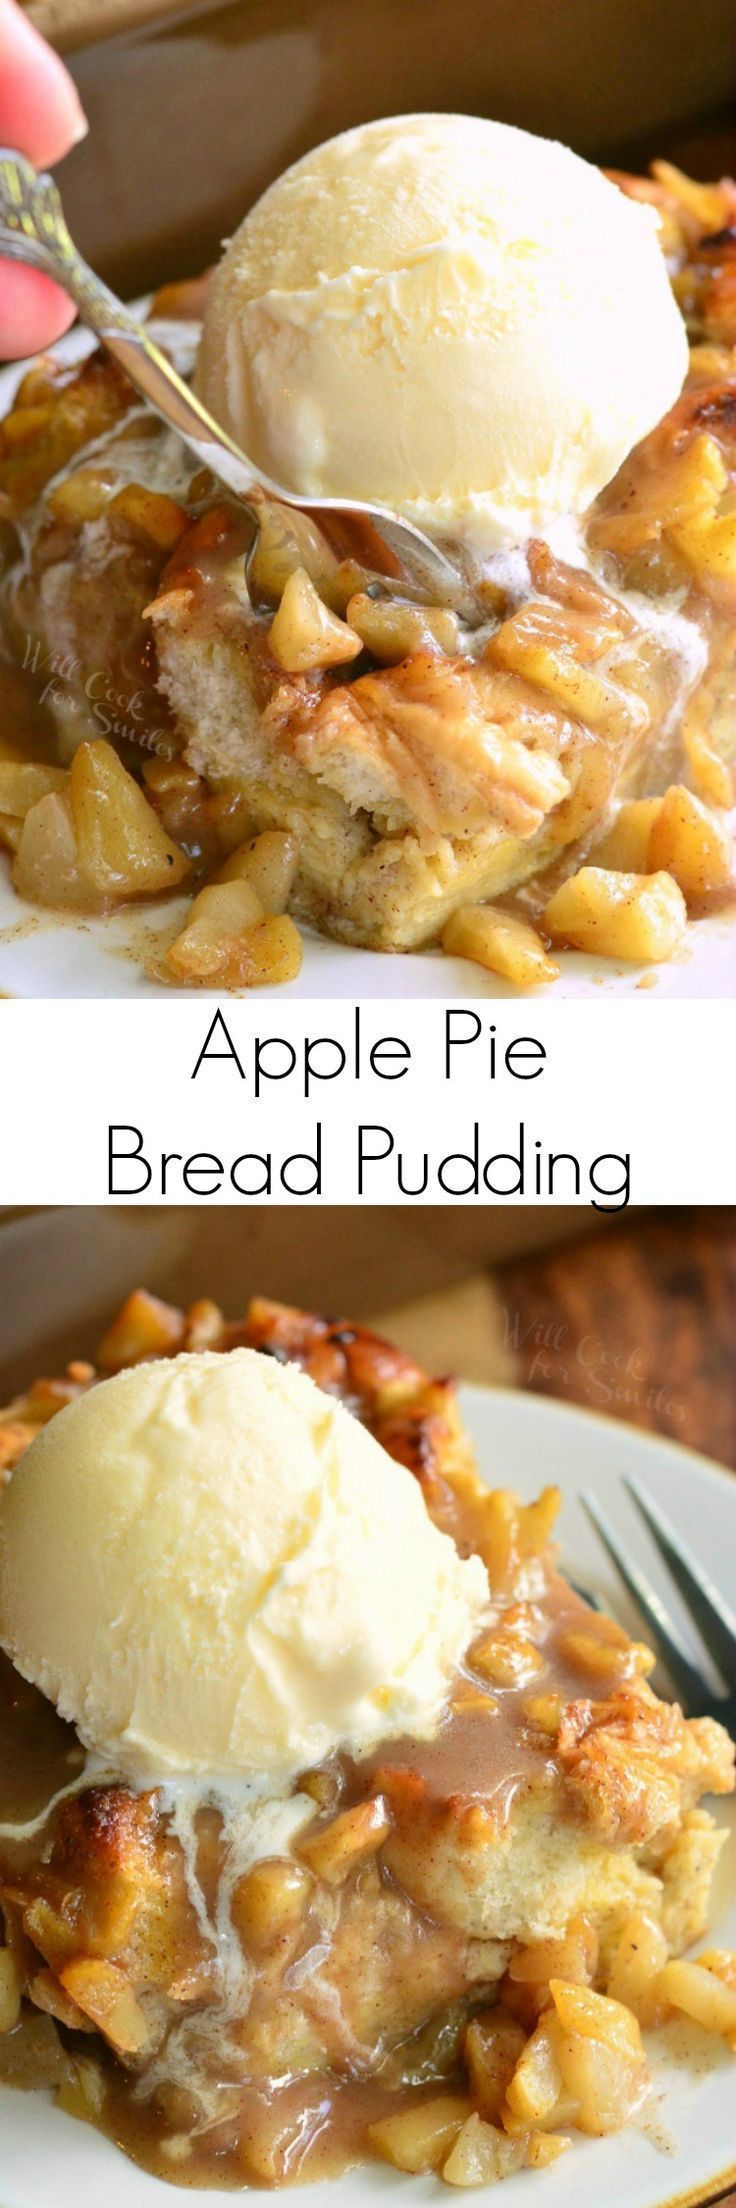 Apple Pie Bread Pudding. Comforting bread pudding made with apple pie filling. Serve it hot and with some vanilla ice cream on top